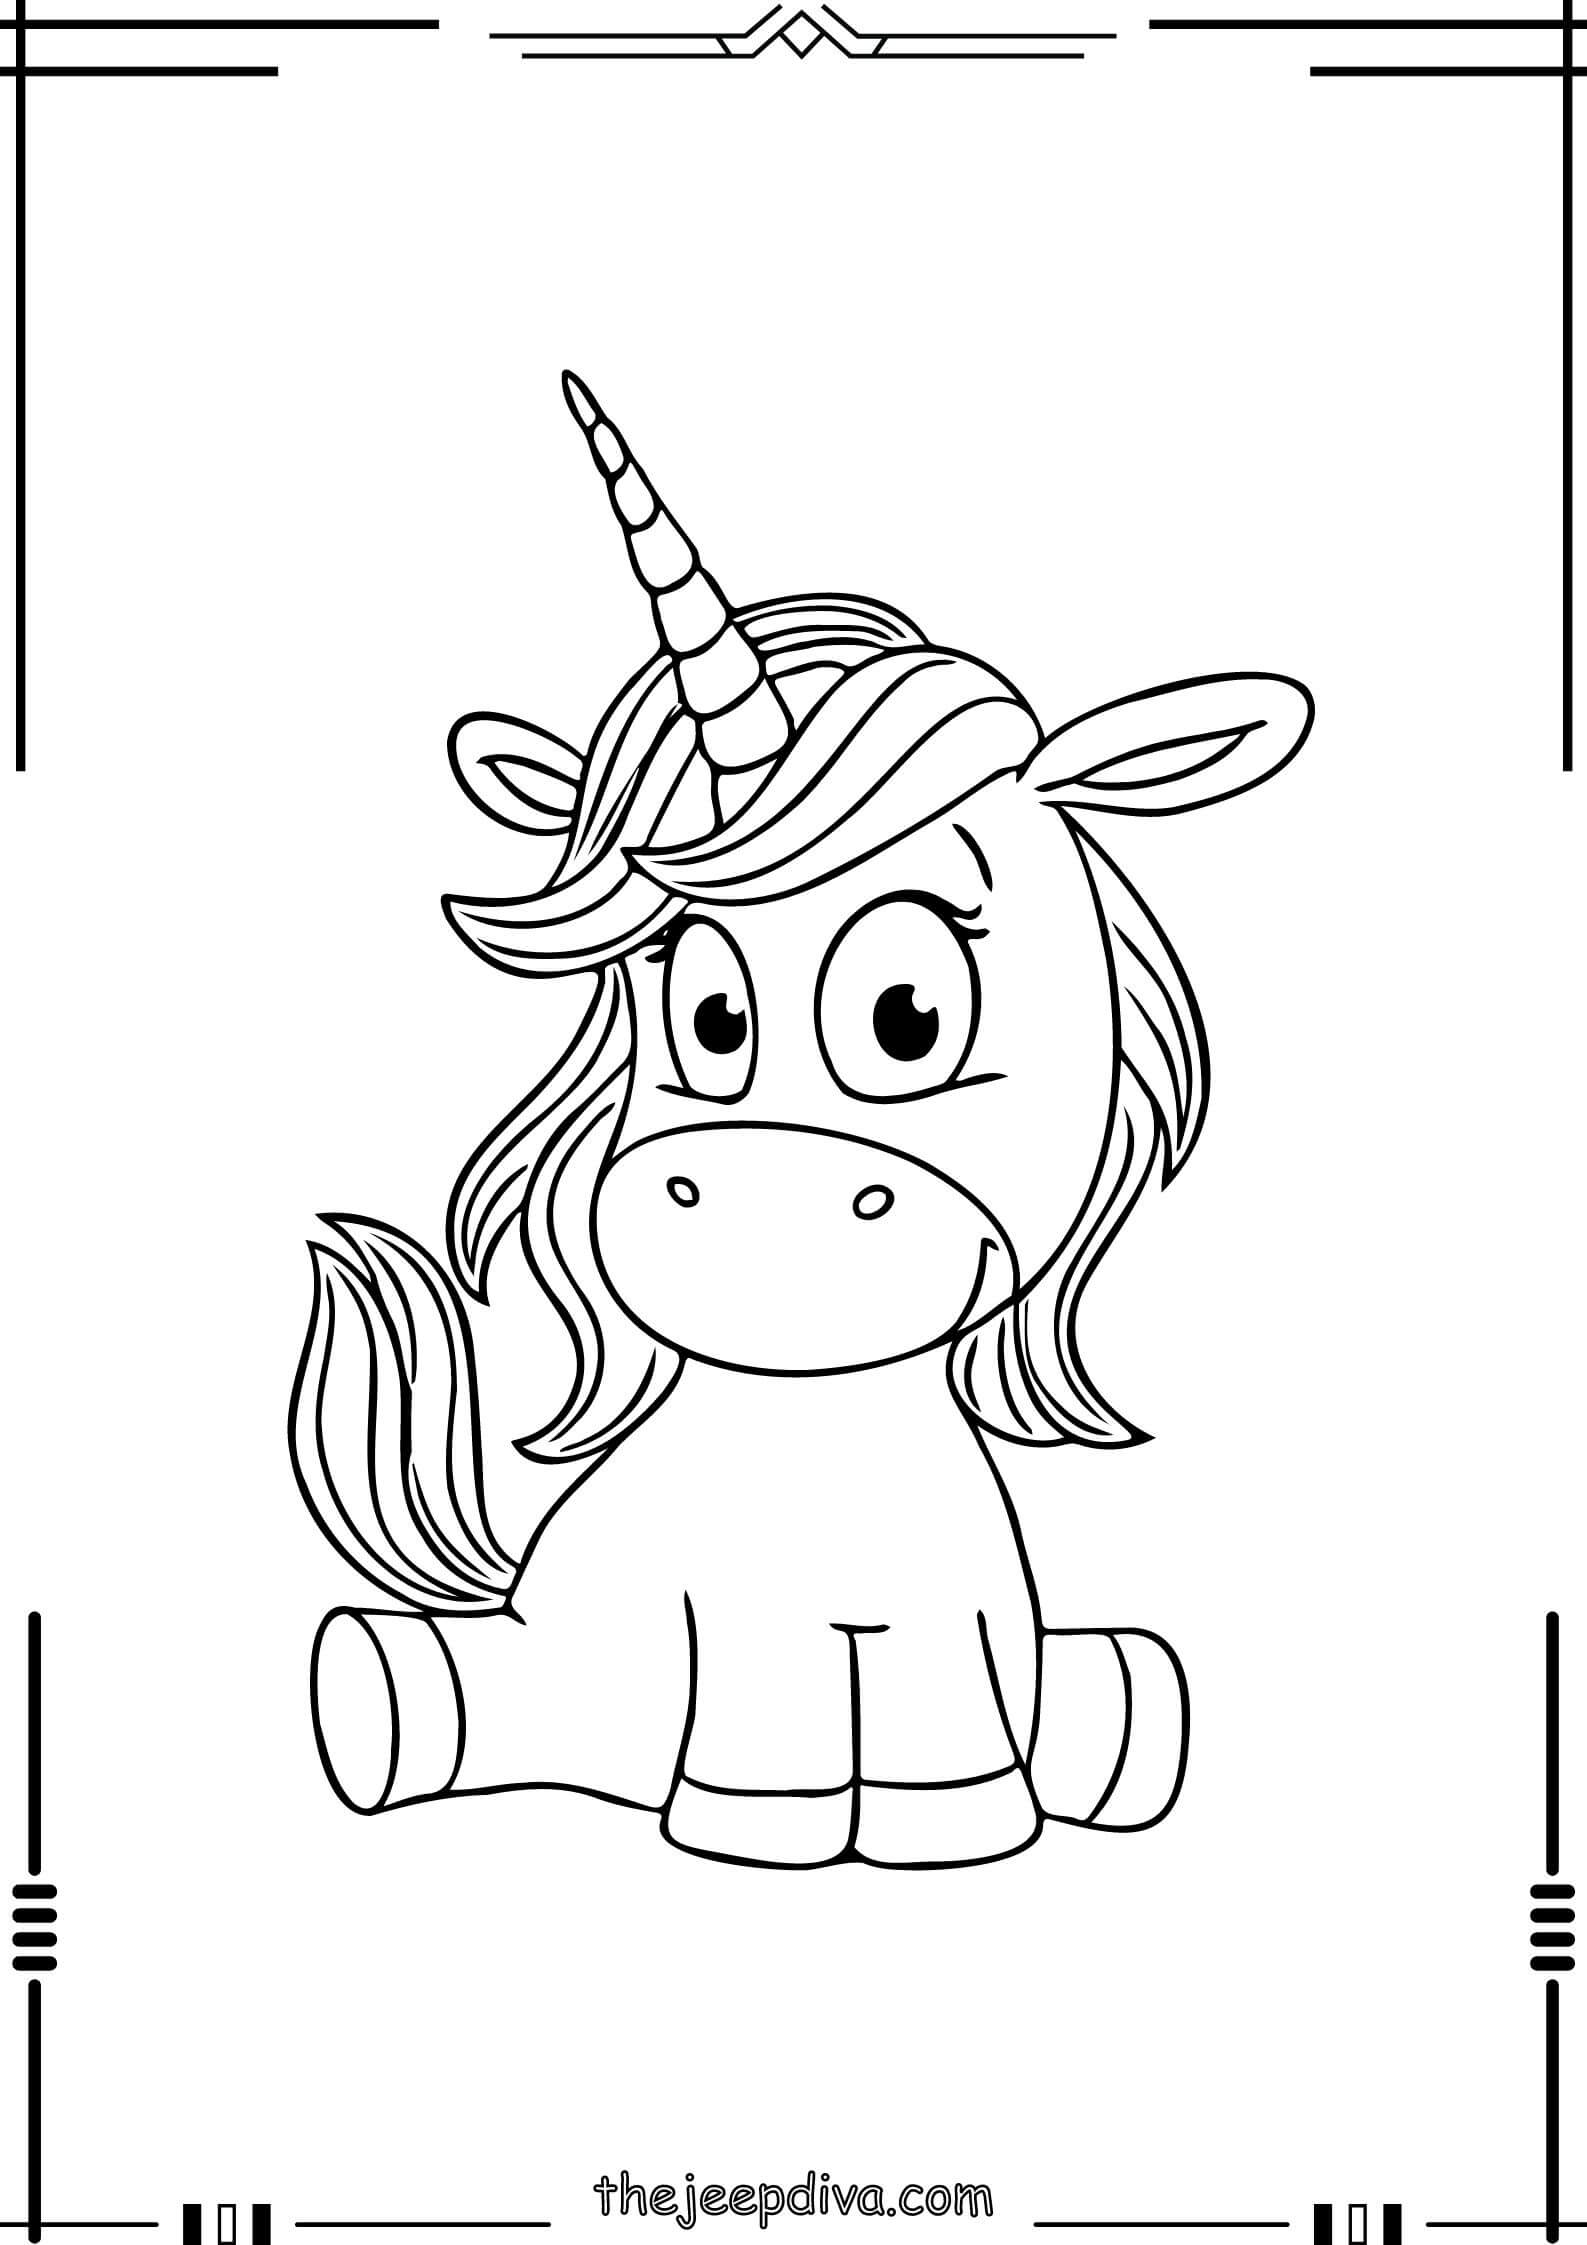 unicorn-coloring-page-easy-8